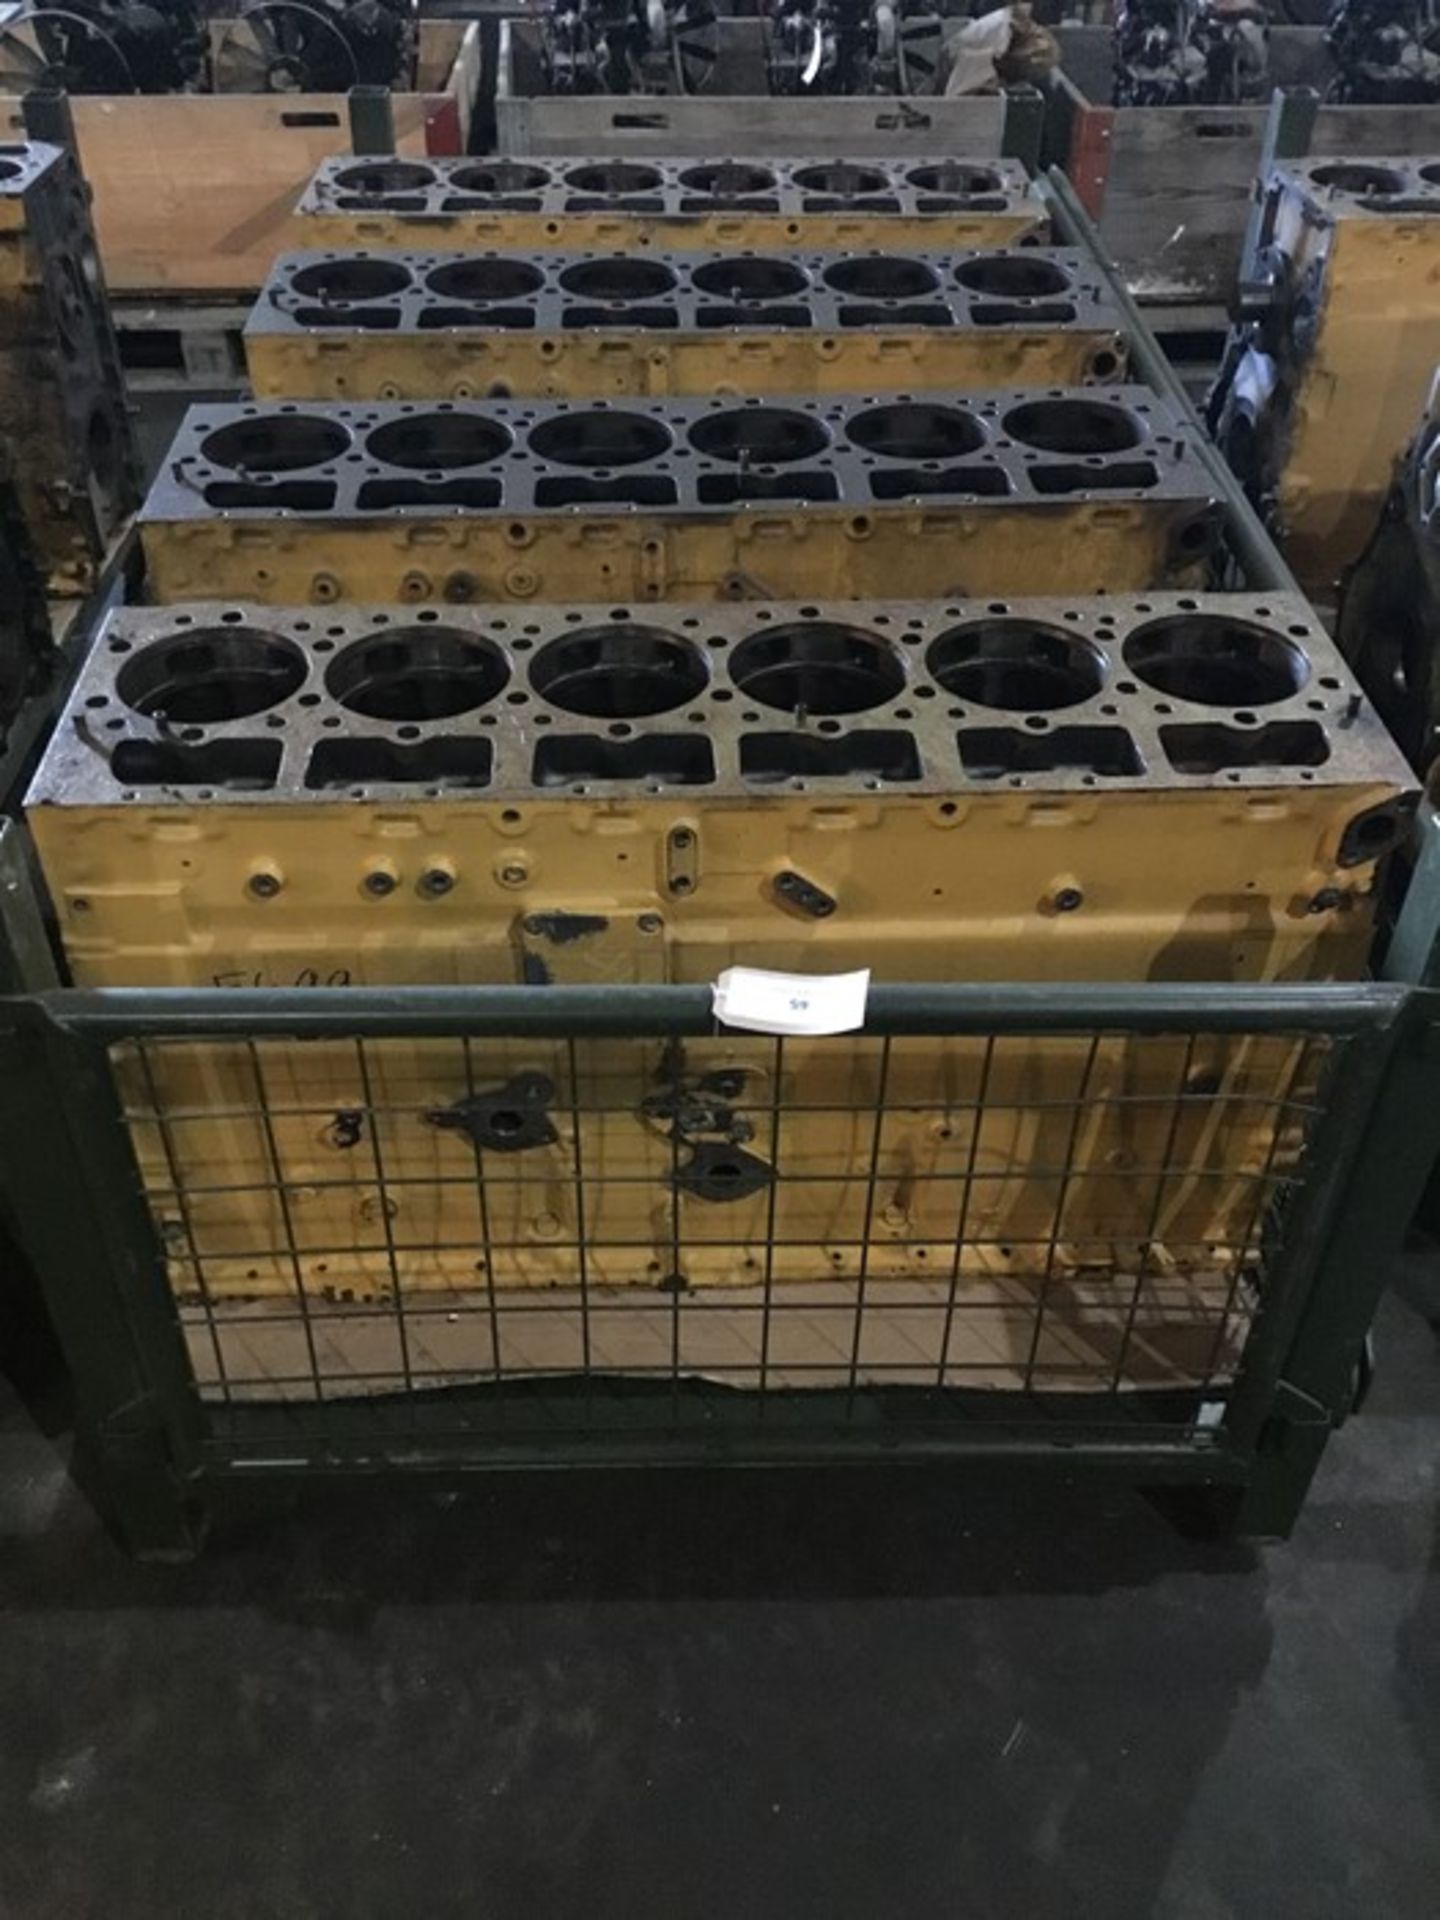 Stillage containing qty 3 Caterpillar 3406E 6cyl Bare block Serial 1DZ05560,Serial 1DZ05250 Serial